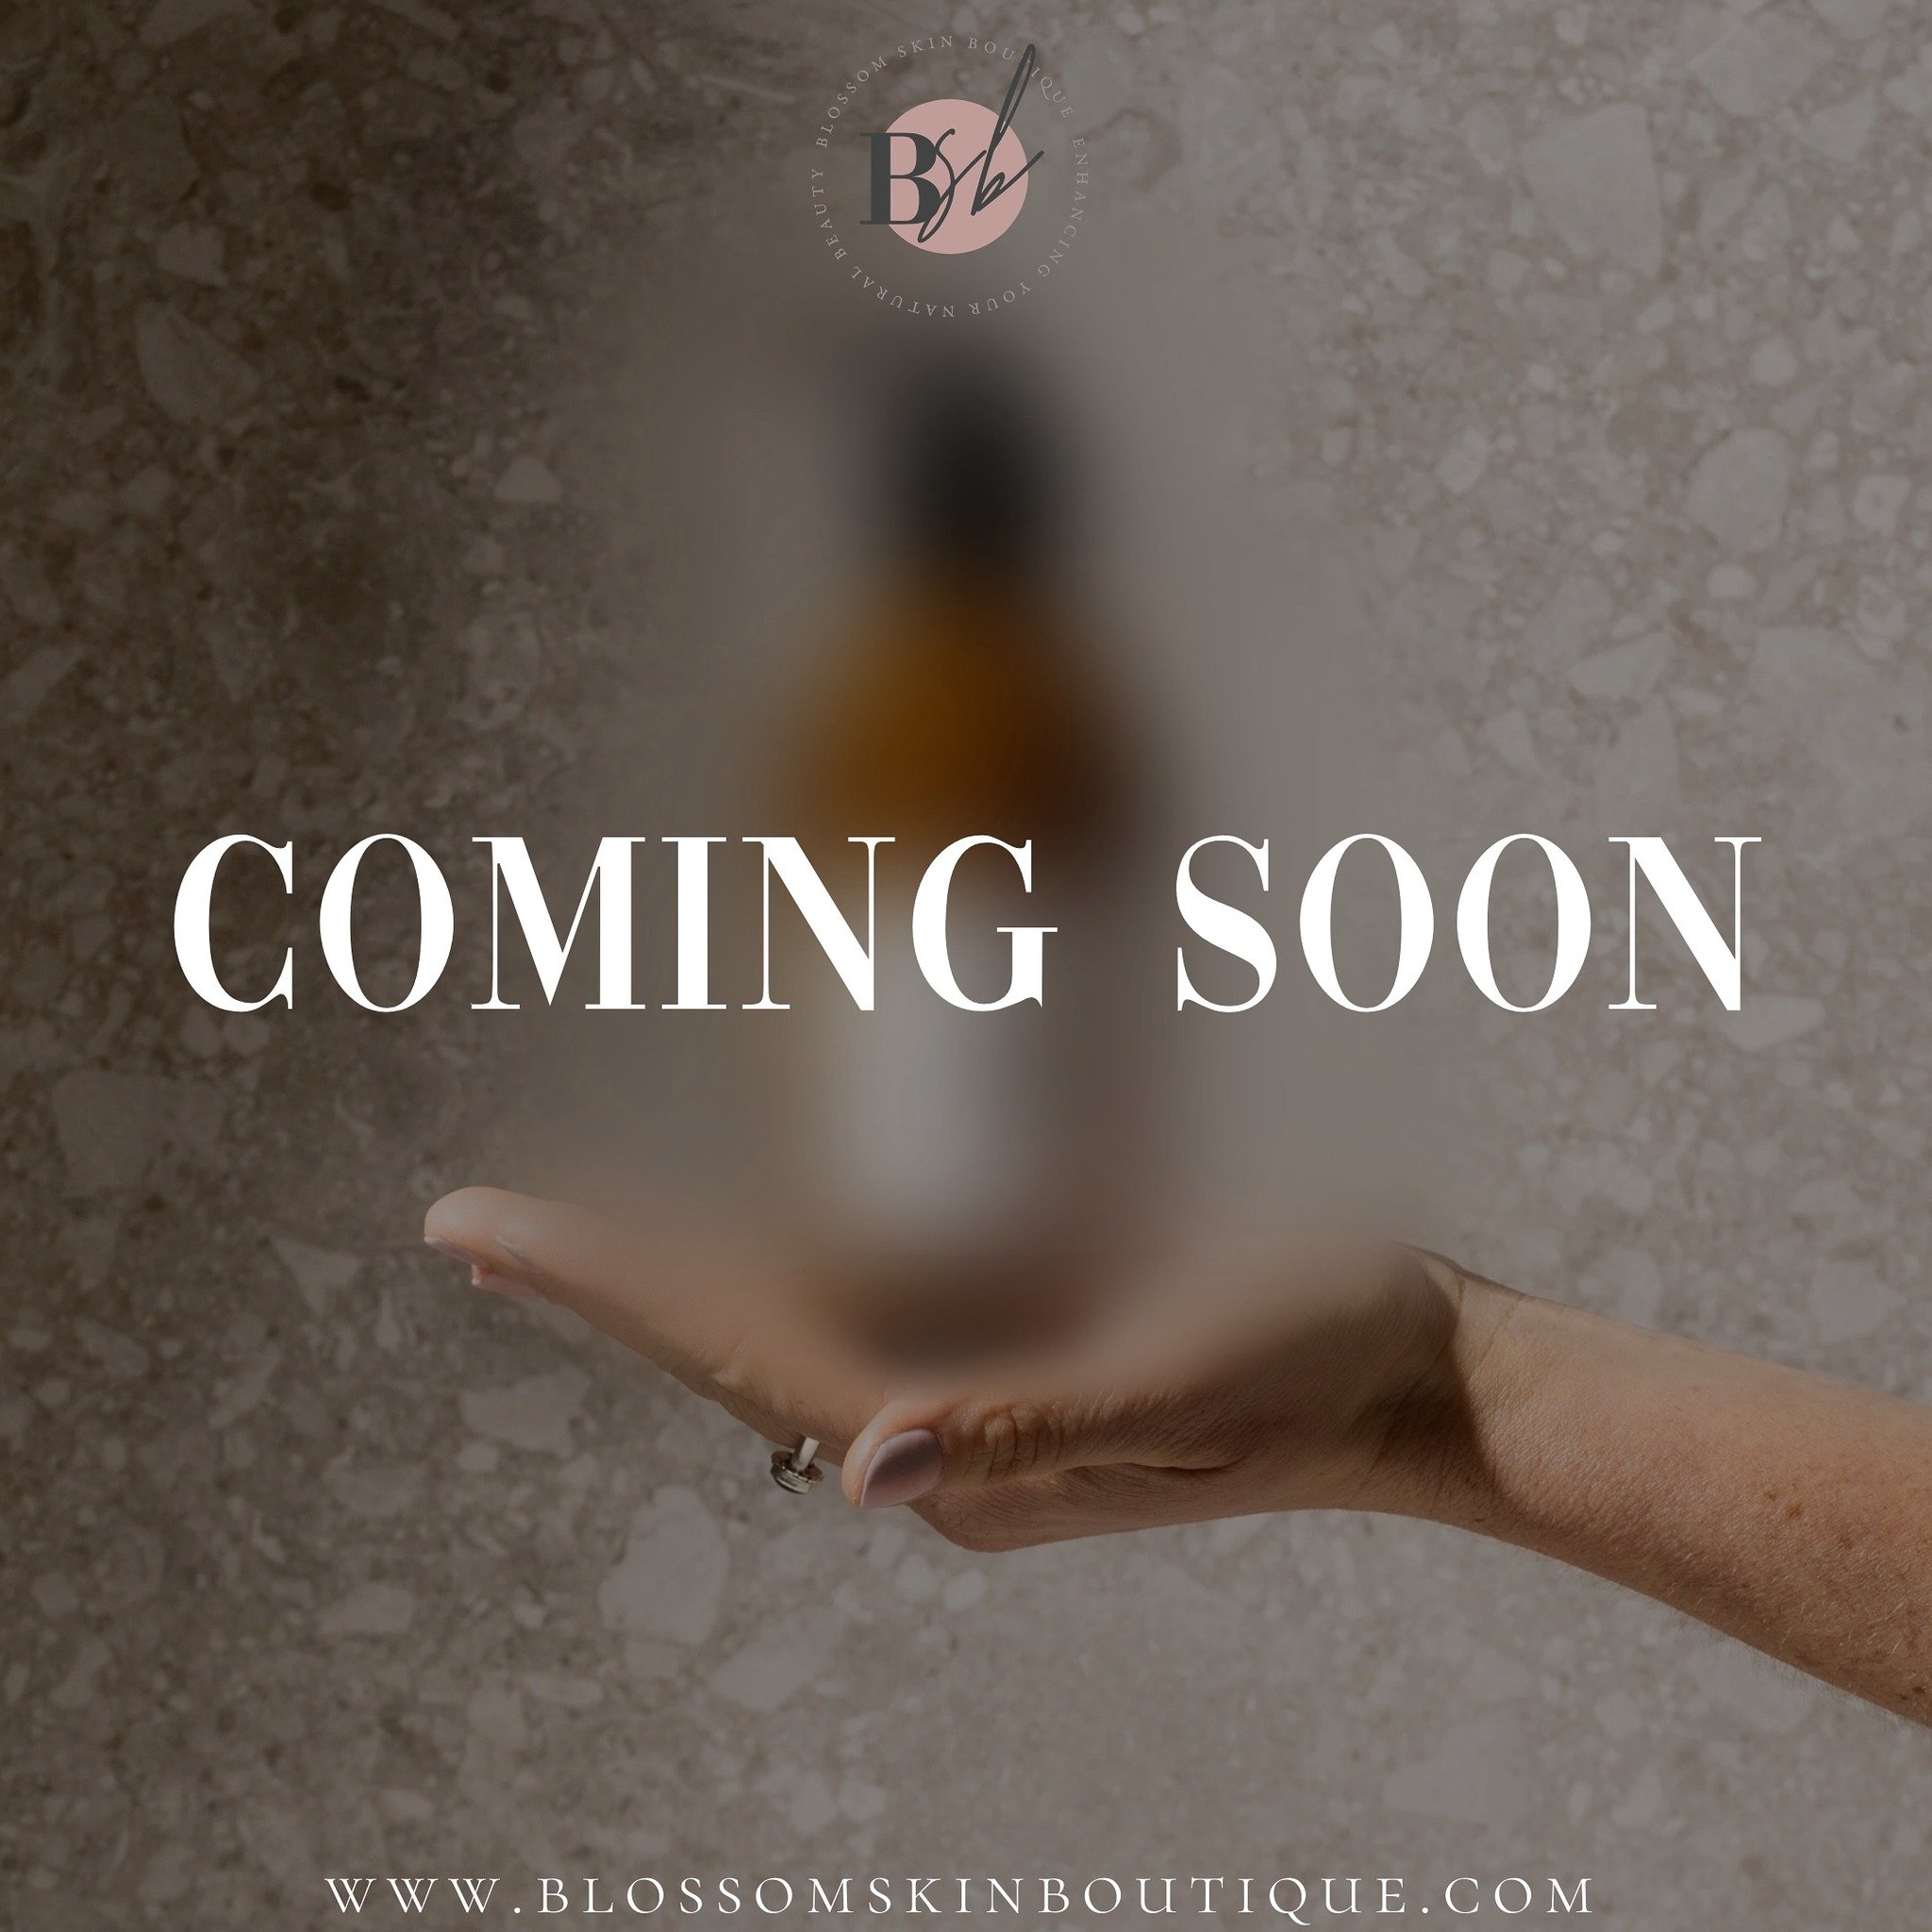 When we choose a new service or product to the clinic, we like to try it out ourselves and do the research🌱

And the products we&rsquo;re bringing soon - we&rsquo;re absolutely in love with✨🙌

🌱 @blossomskinboutique 
☎️ 647.531.7236
💻www.blossoms